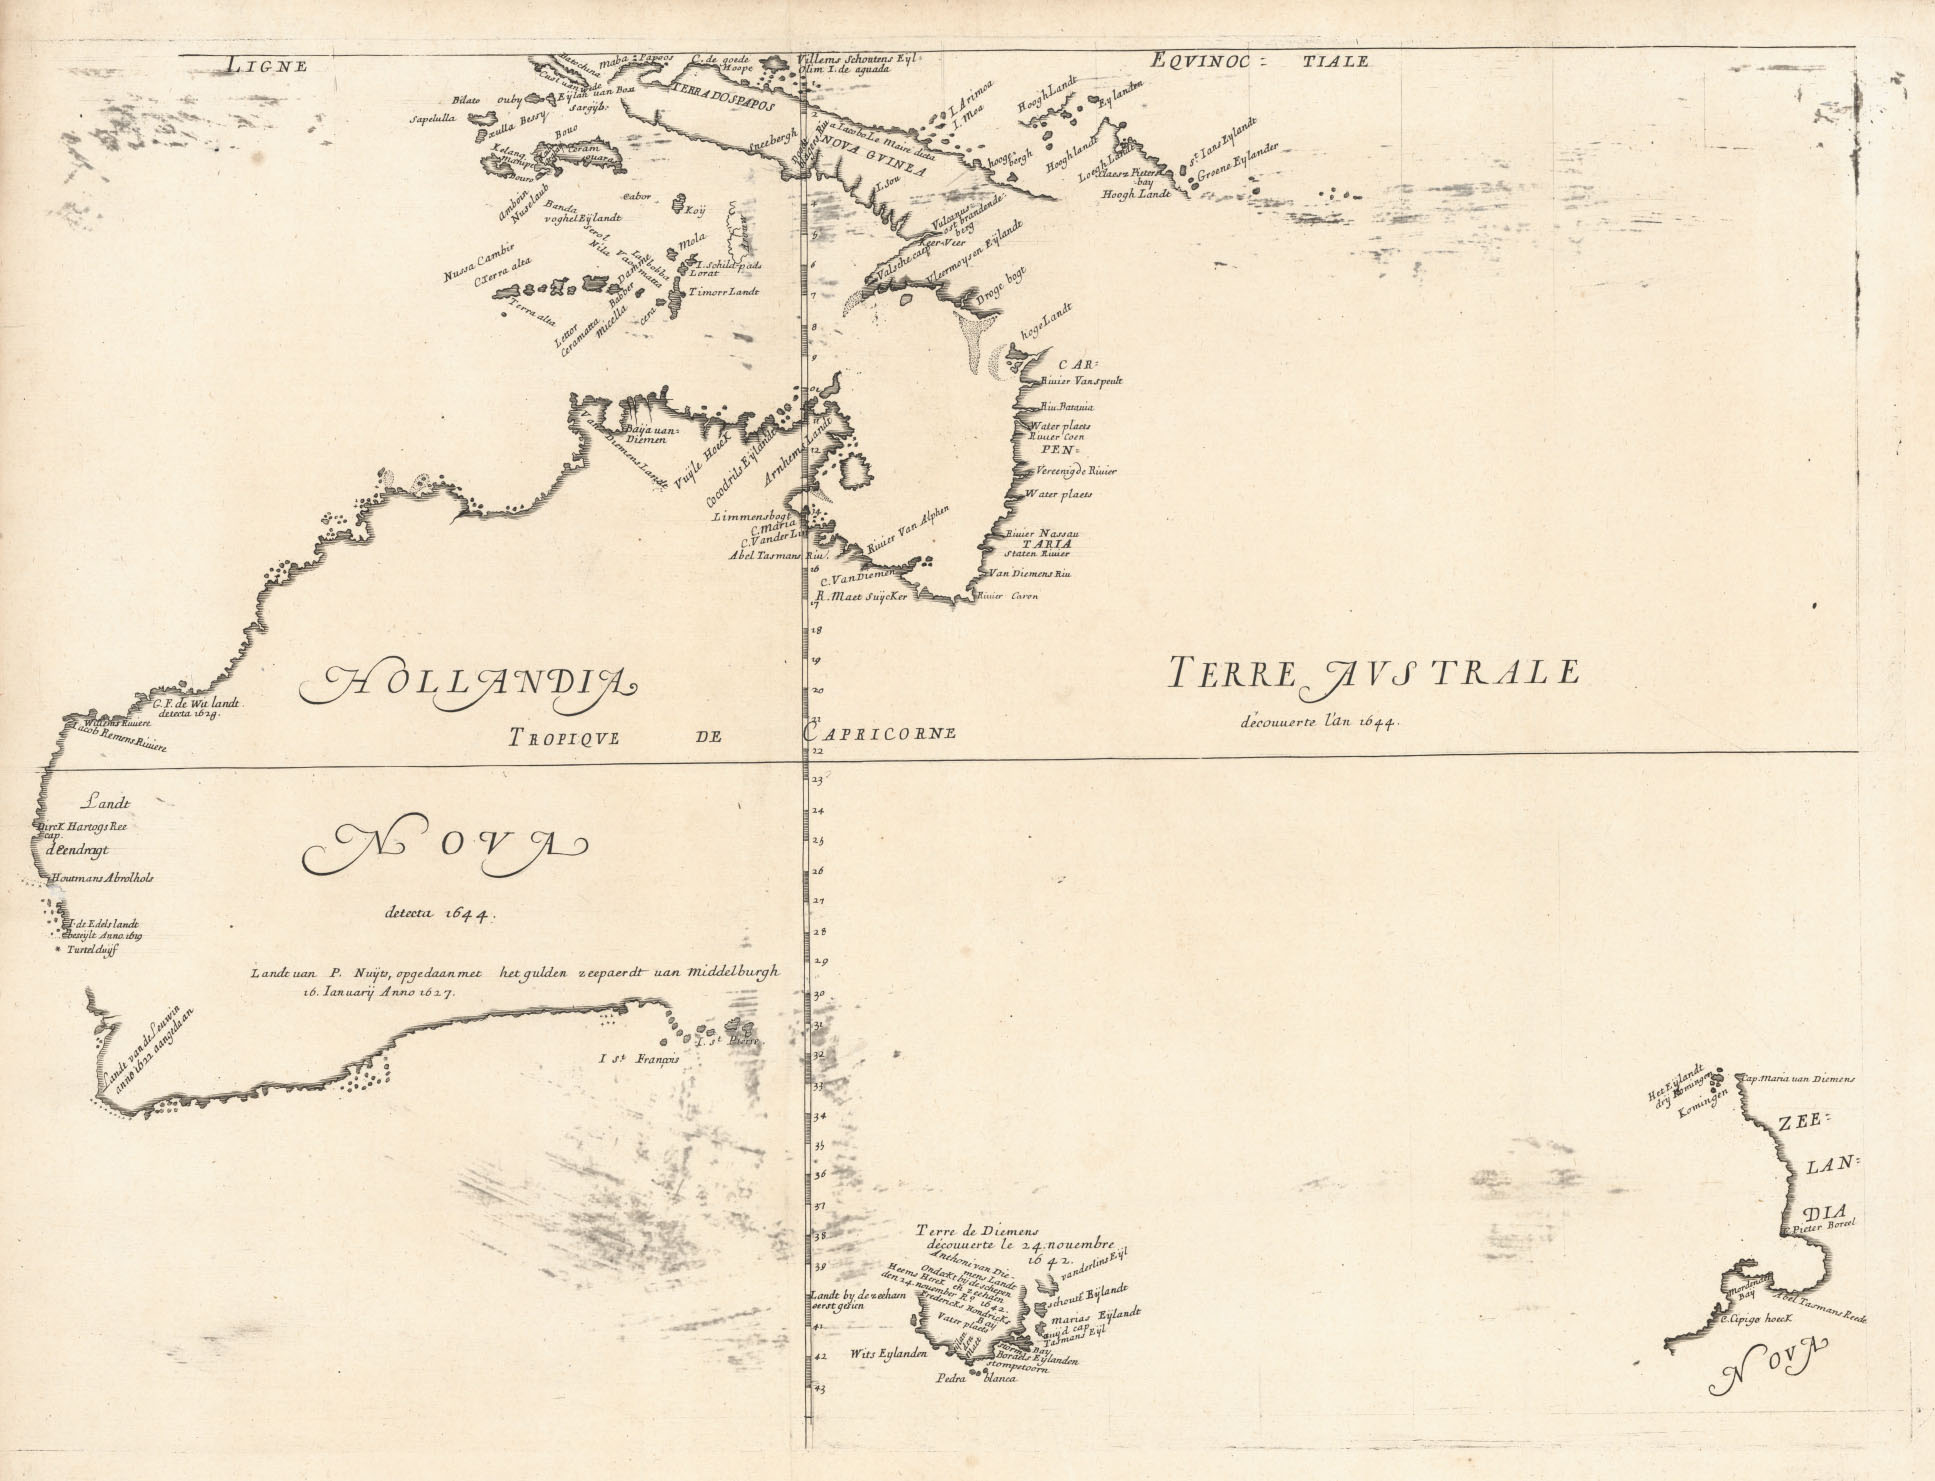 An early map of parts of Australia and nearby countries, made by Dutch explorers, 1644.